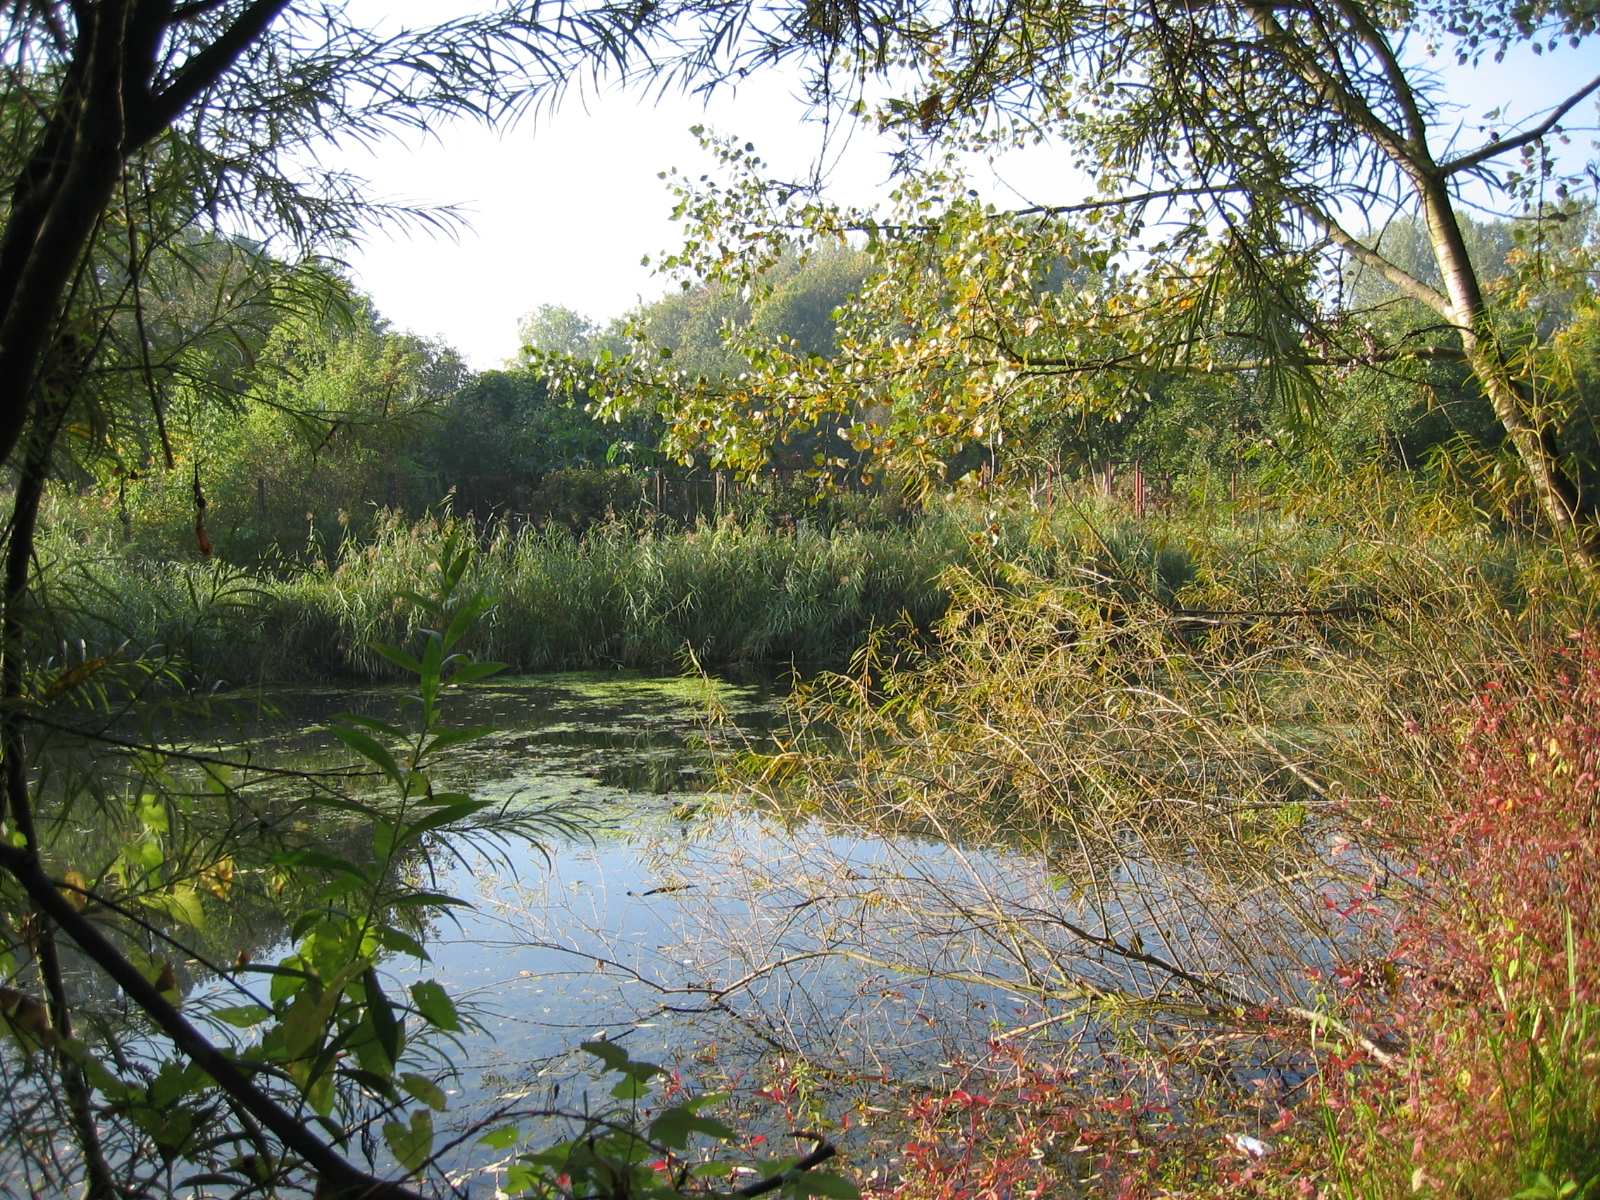 a pond with reeds and weeds near to it